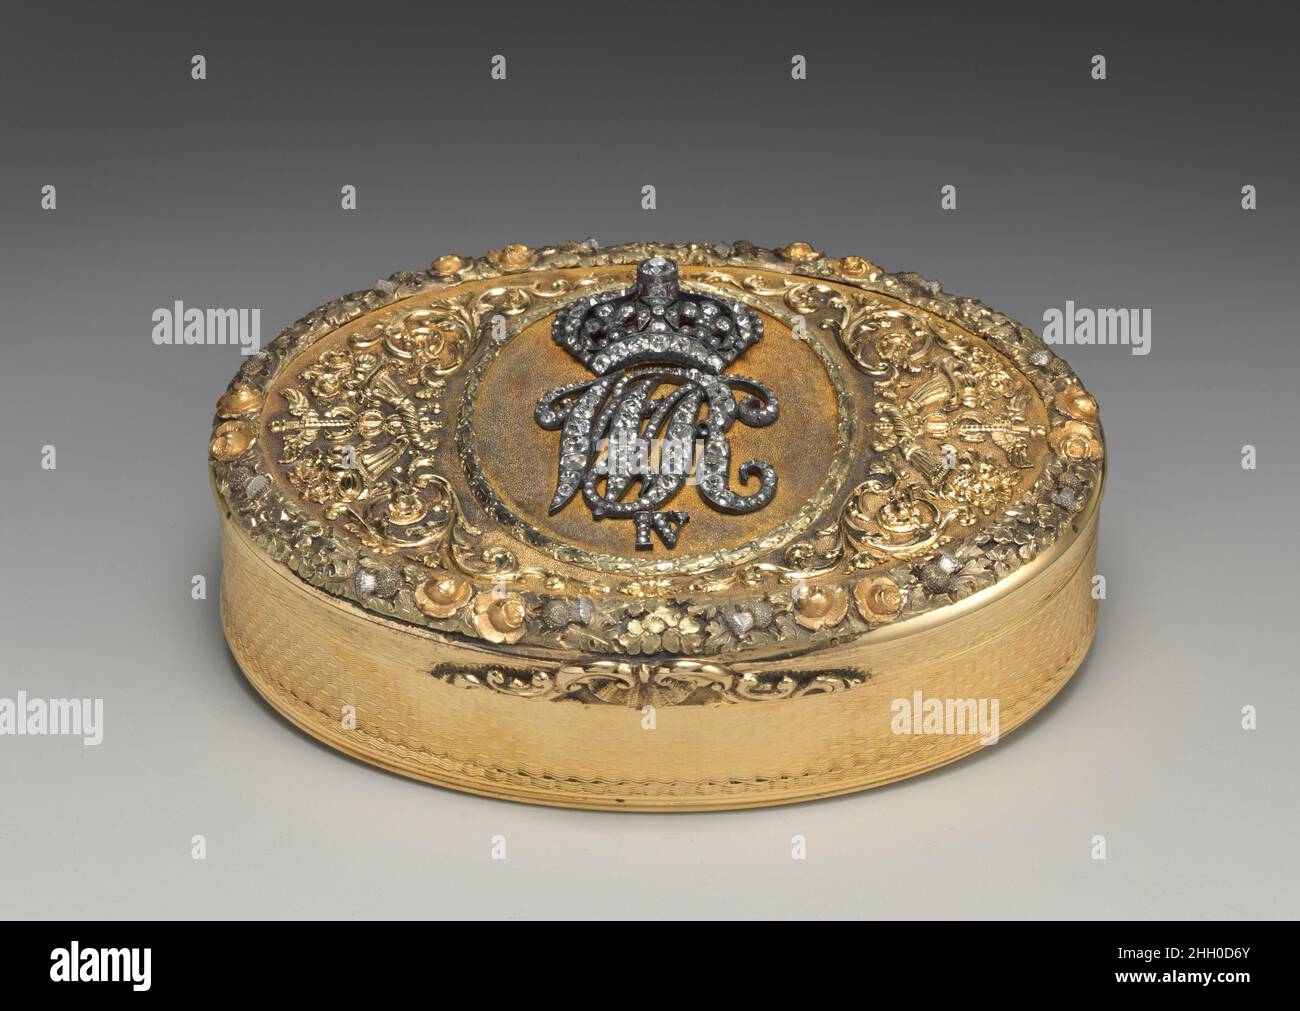 Snuffbox with cipher of William IV of the United Kingdom of Great Britian and Ireland 1825–26 John Northam WR IV crowned is the monogram of King William IV (born 1765, reigned 1830-37). This otherwise plain box was embellished with an encrusted plaque bearing his monogram; the border combines roses, thistles, and shamrocks. The box was presented to Henry George Scholtz, British consul at Lisbon (1828–34) and the grandfather of the donor's husband.. Snuffbox with cipher of William IV of the United Kingdom of Great Britian and Ireland. British, London. 1825–26. Gold, diamonds, enamel. Metalwork- Stock Photo